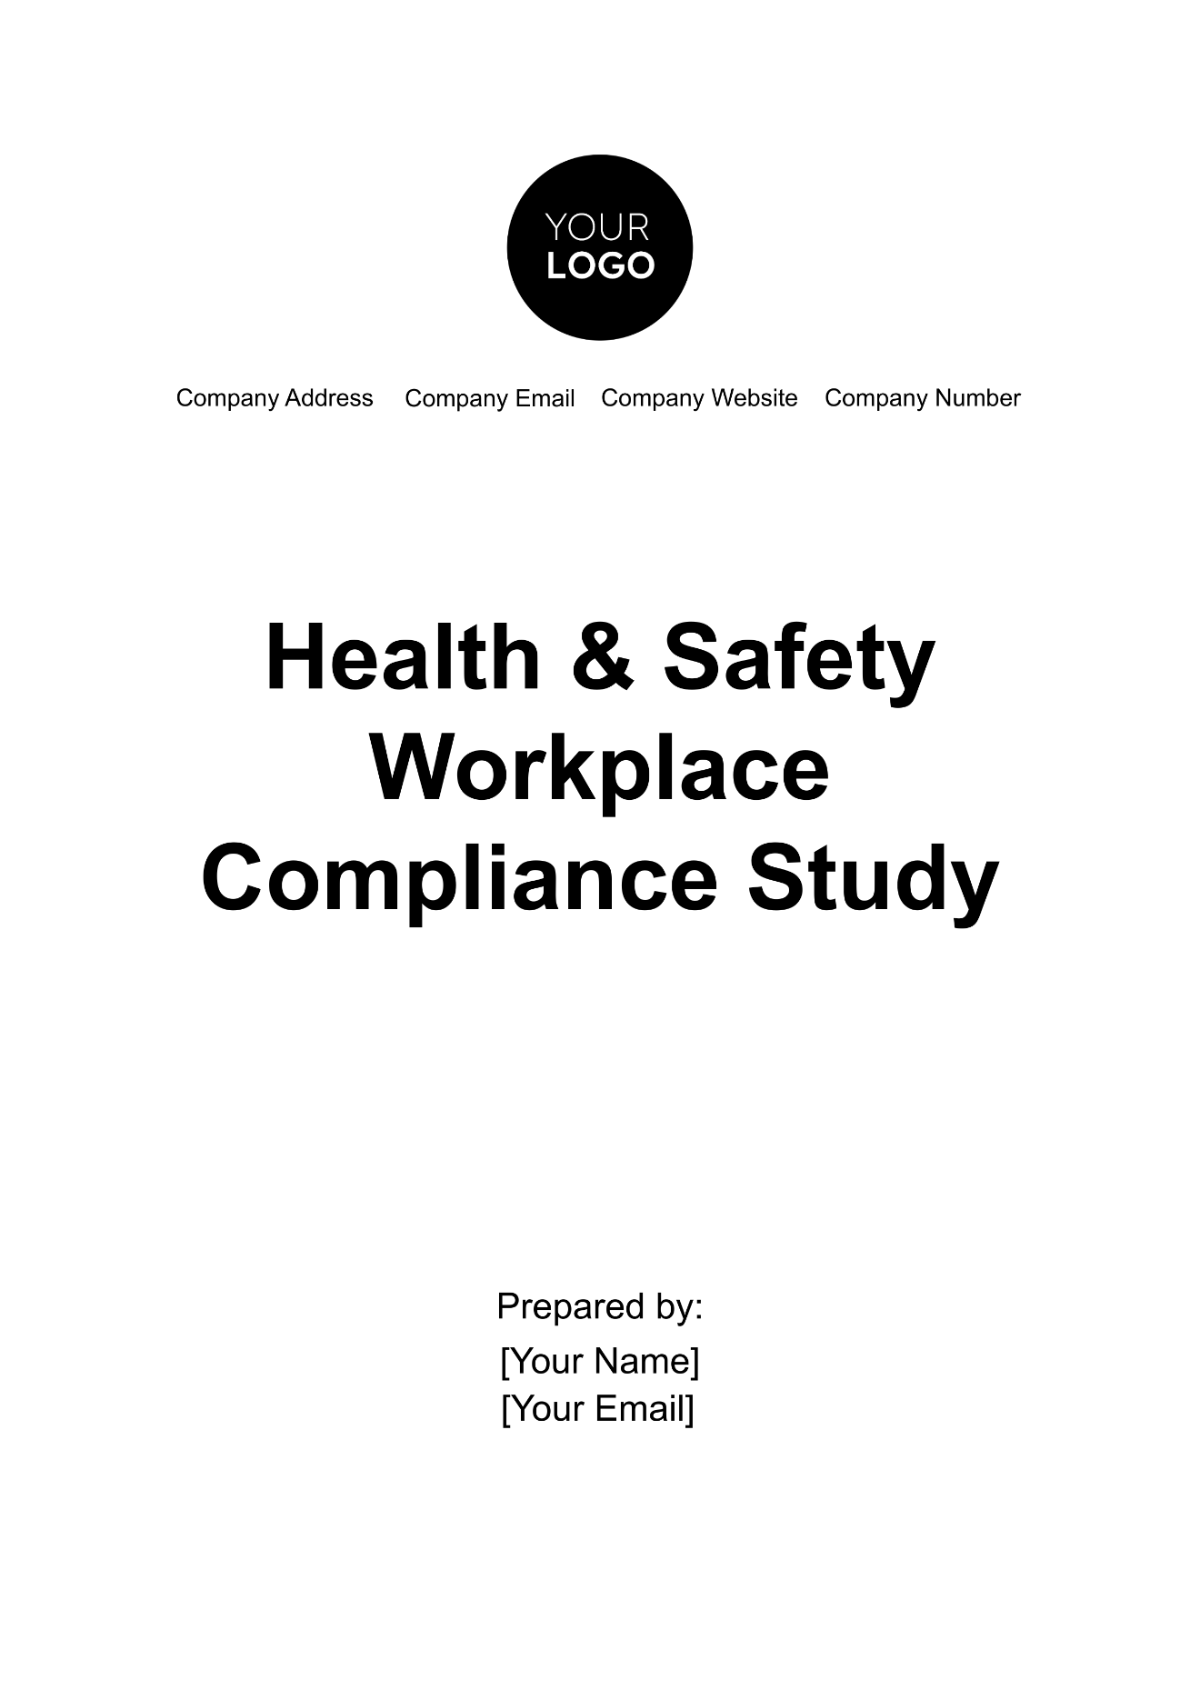 Free Health & Safety Workplace Compliance Study Template